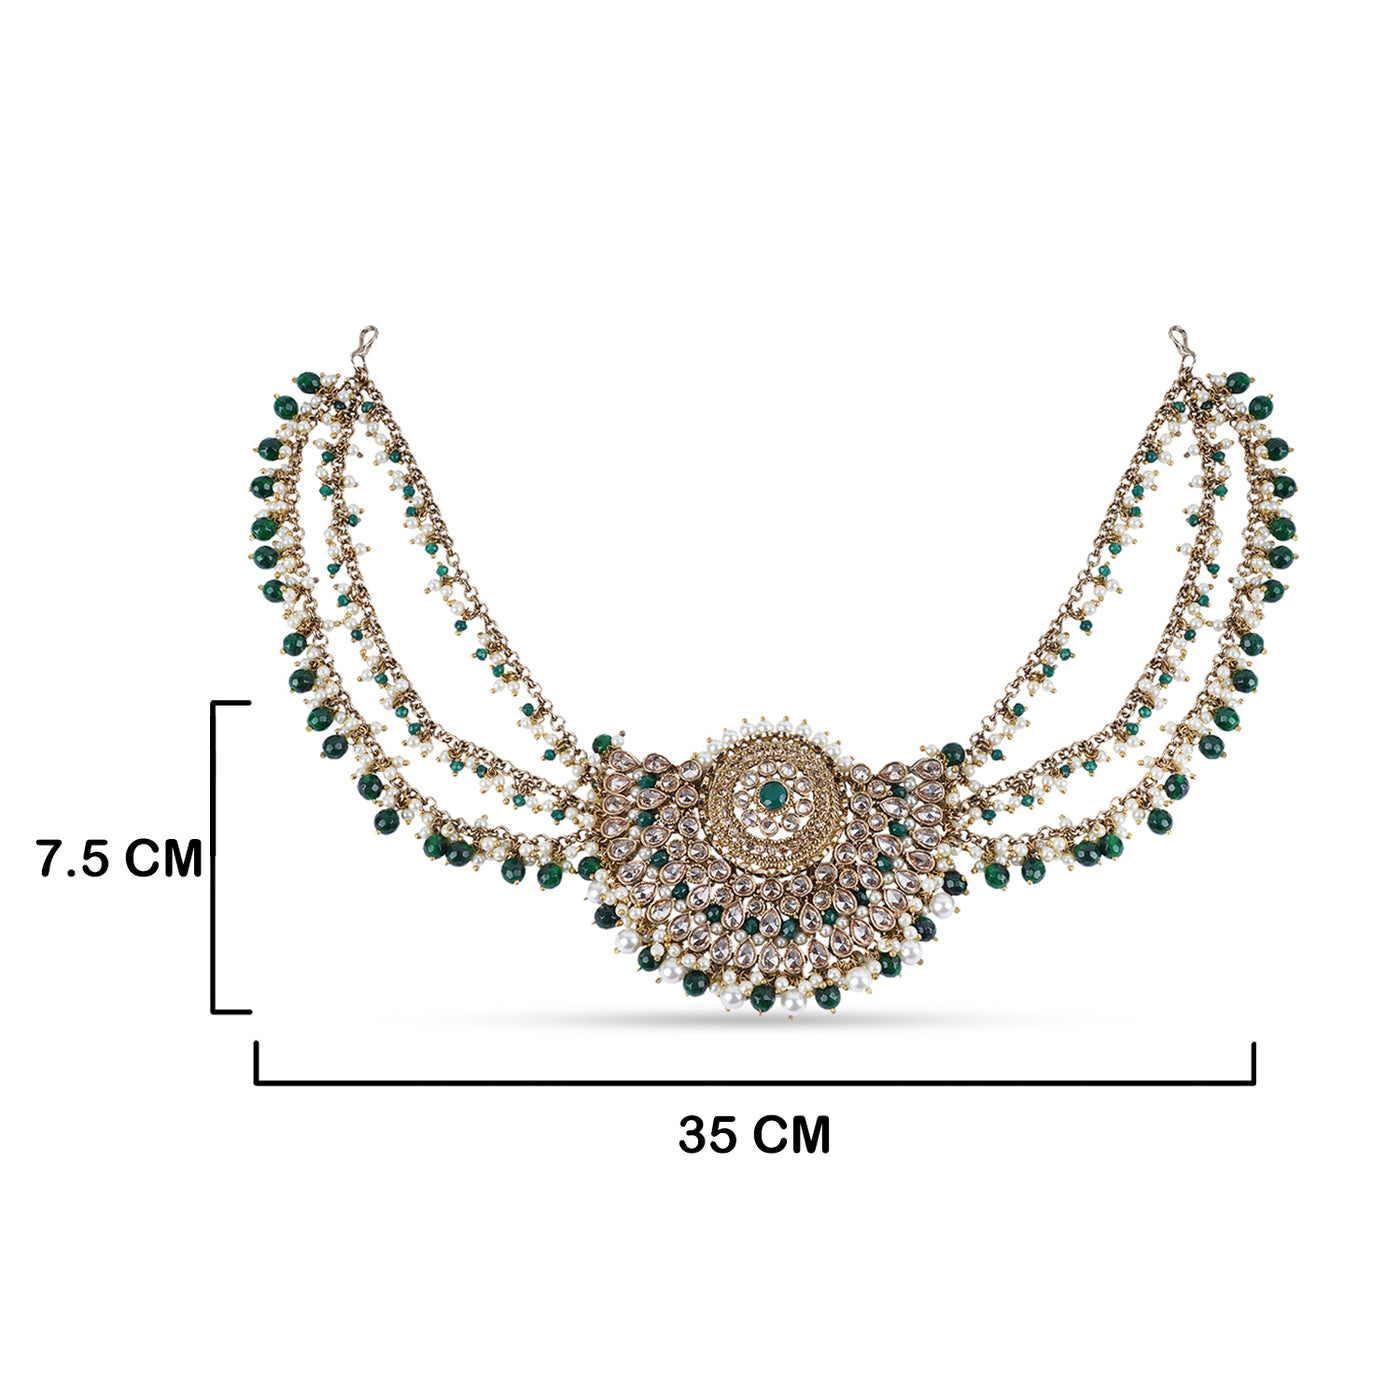  Kundan Green Bead Hair Accessory with measurements in cm. 7.5cm by 35cm.